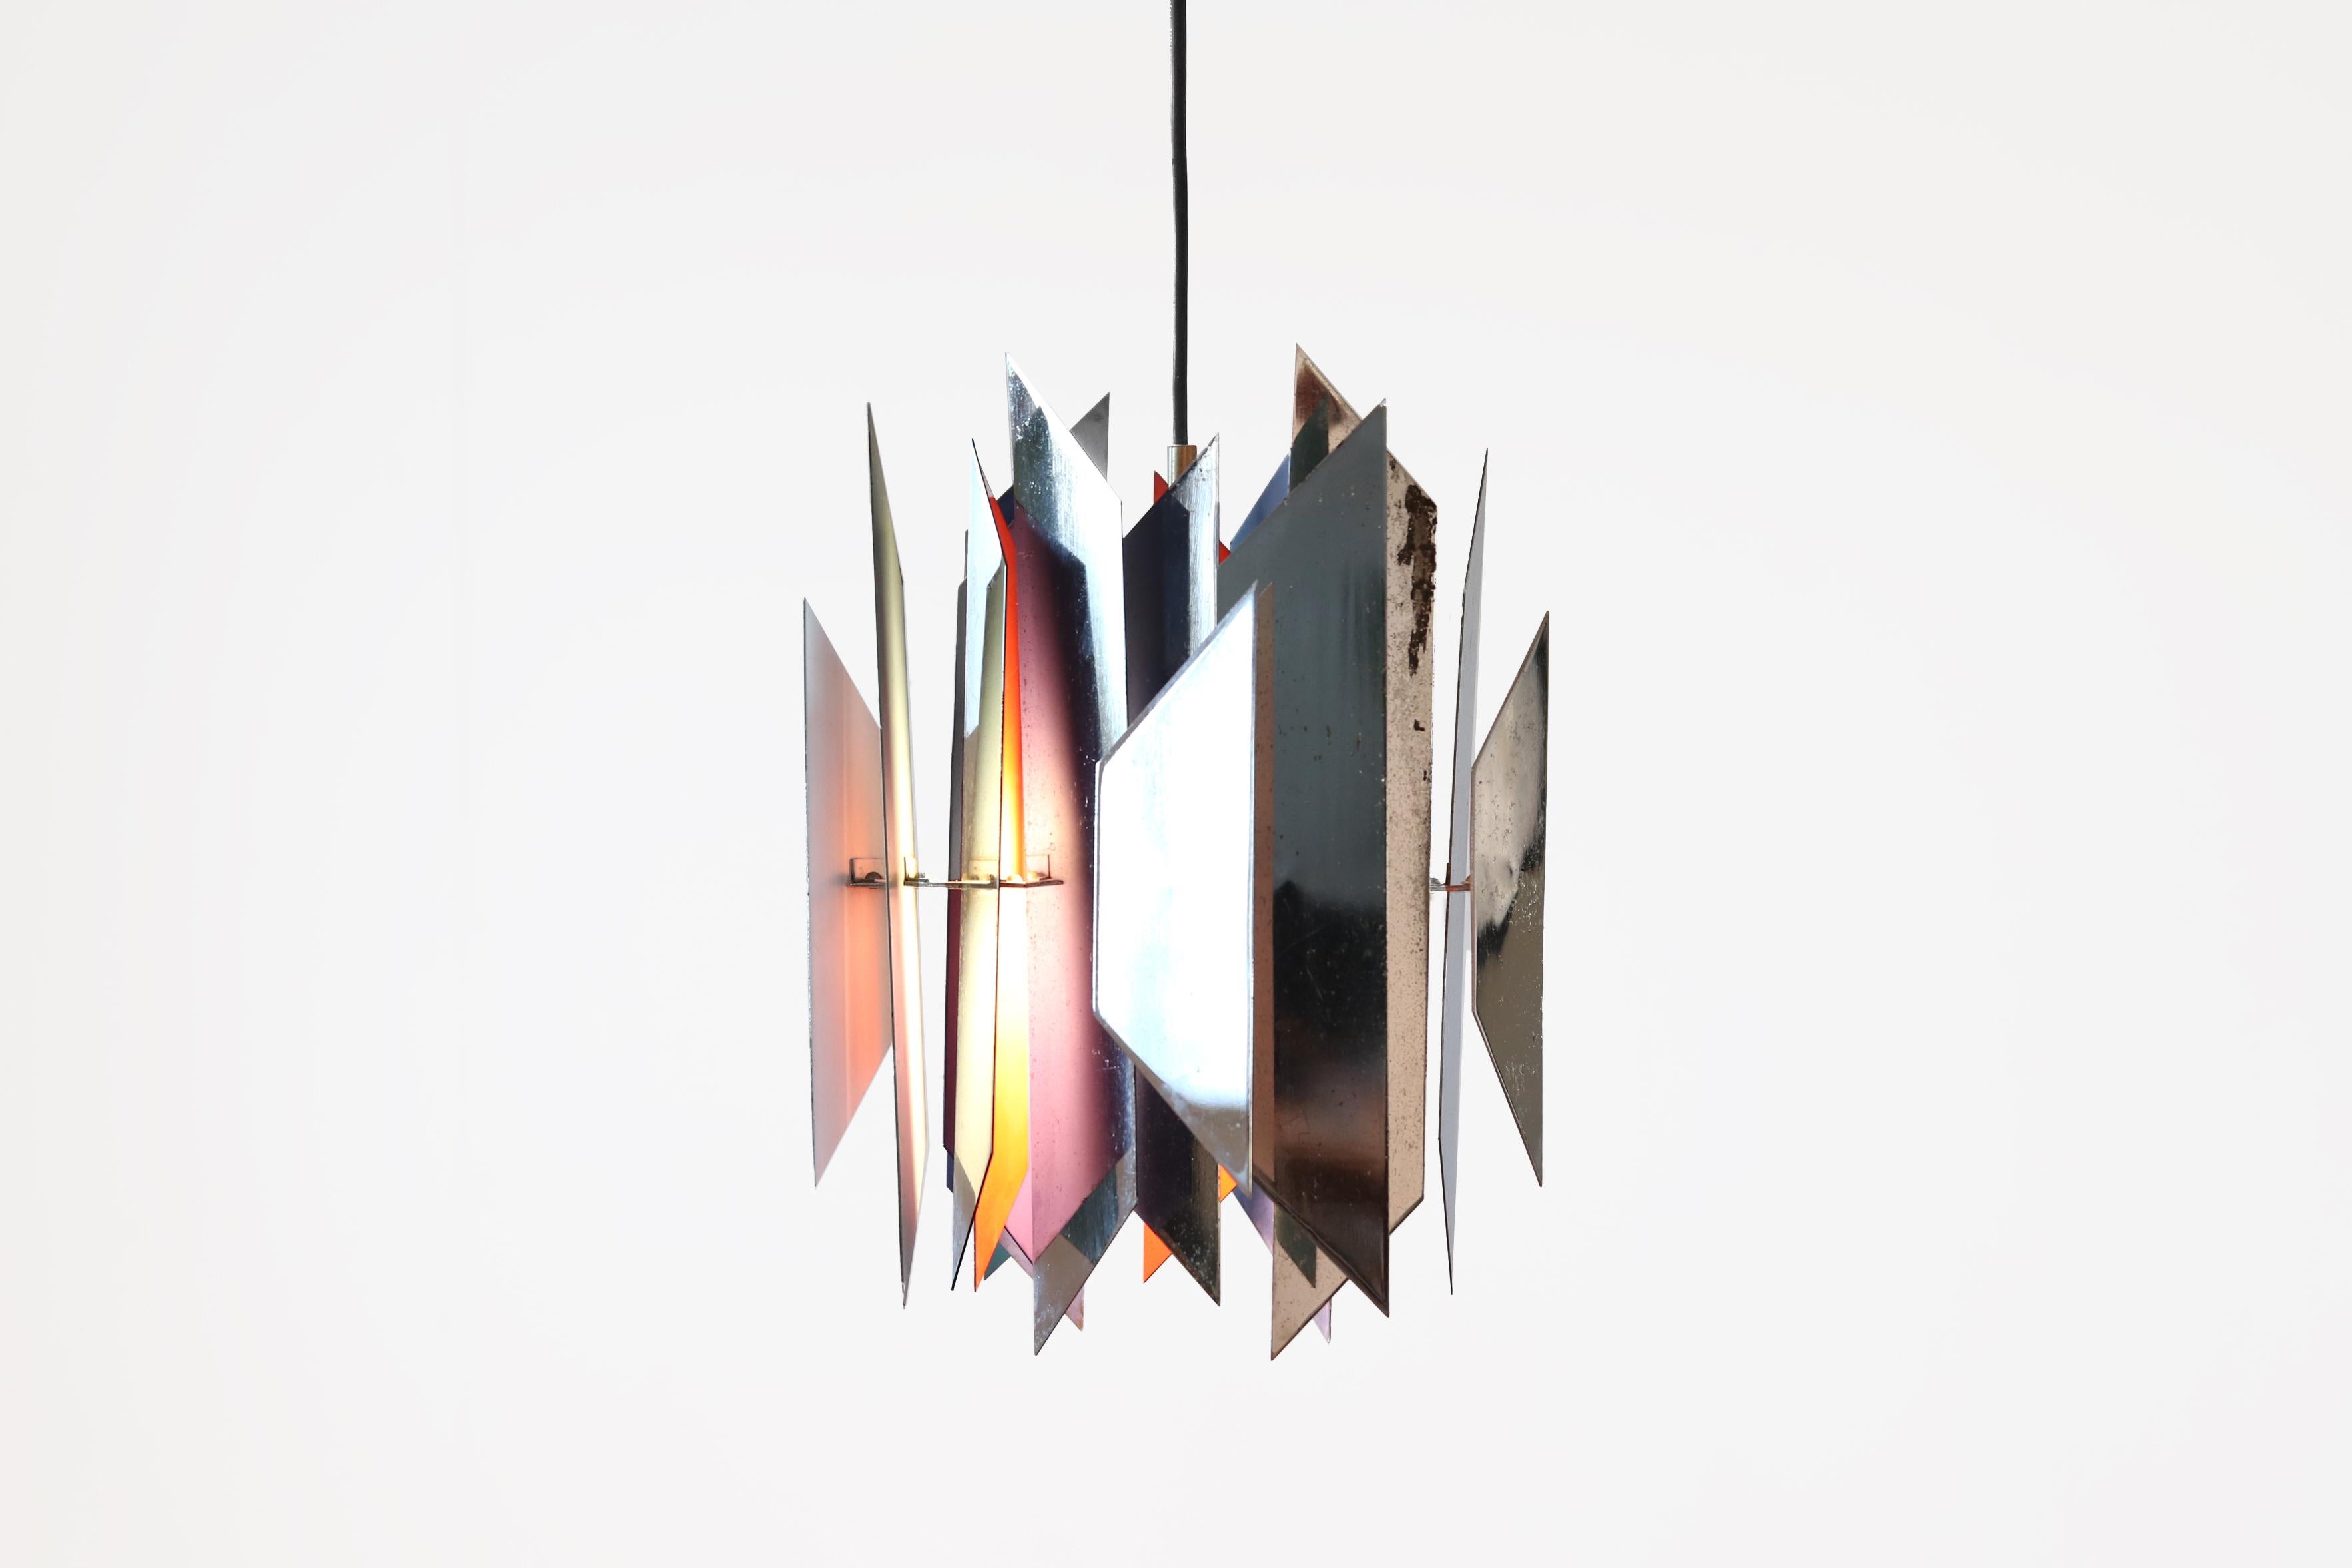 Beautiful hanging lamp by Simon Henningsen for Lyfa. This lamp is often referred to as the Tivoli lamp, but originally this lamp has the name Divan 2. Made of different lacquered and chromed metal slats. This gives you a beautiful art object which